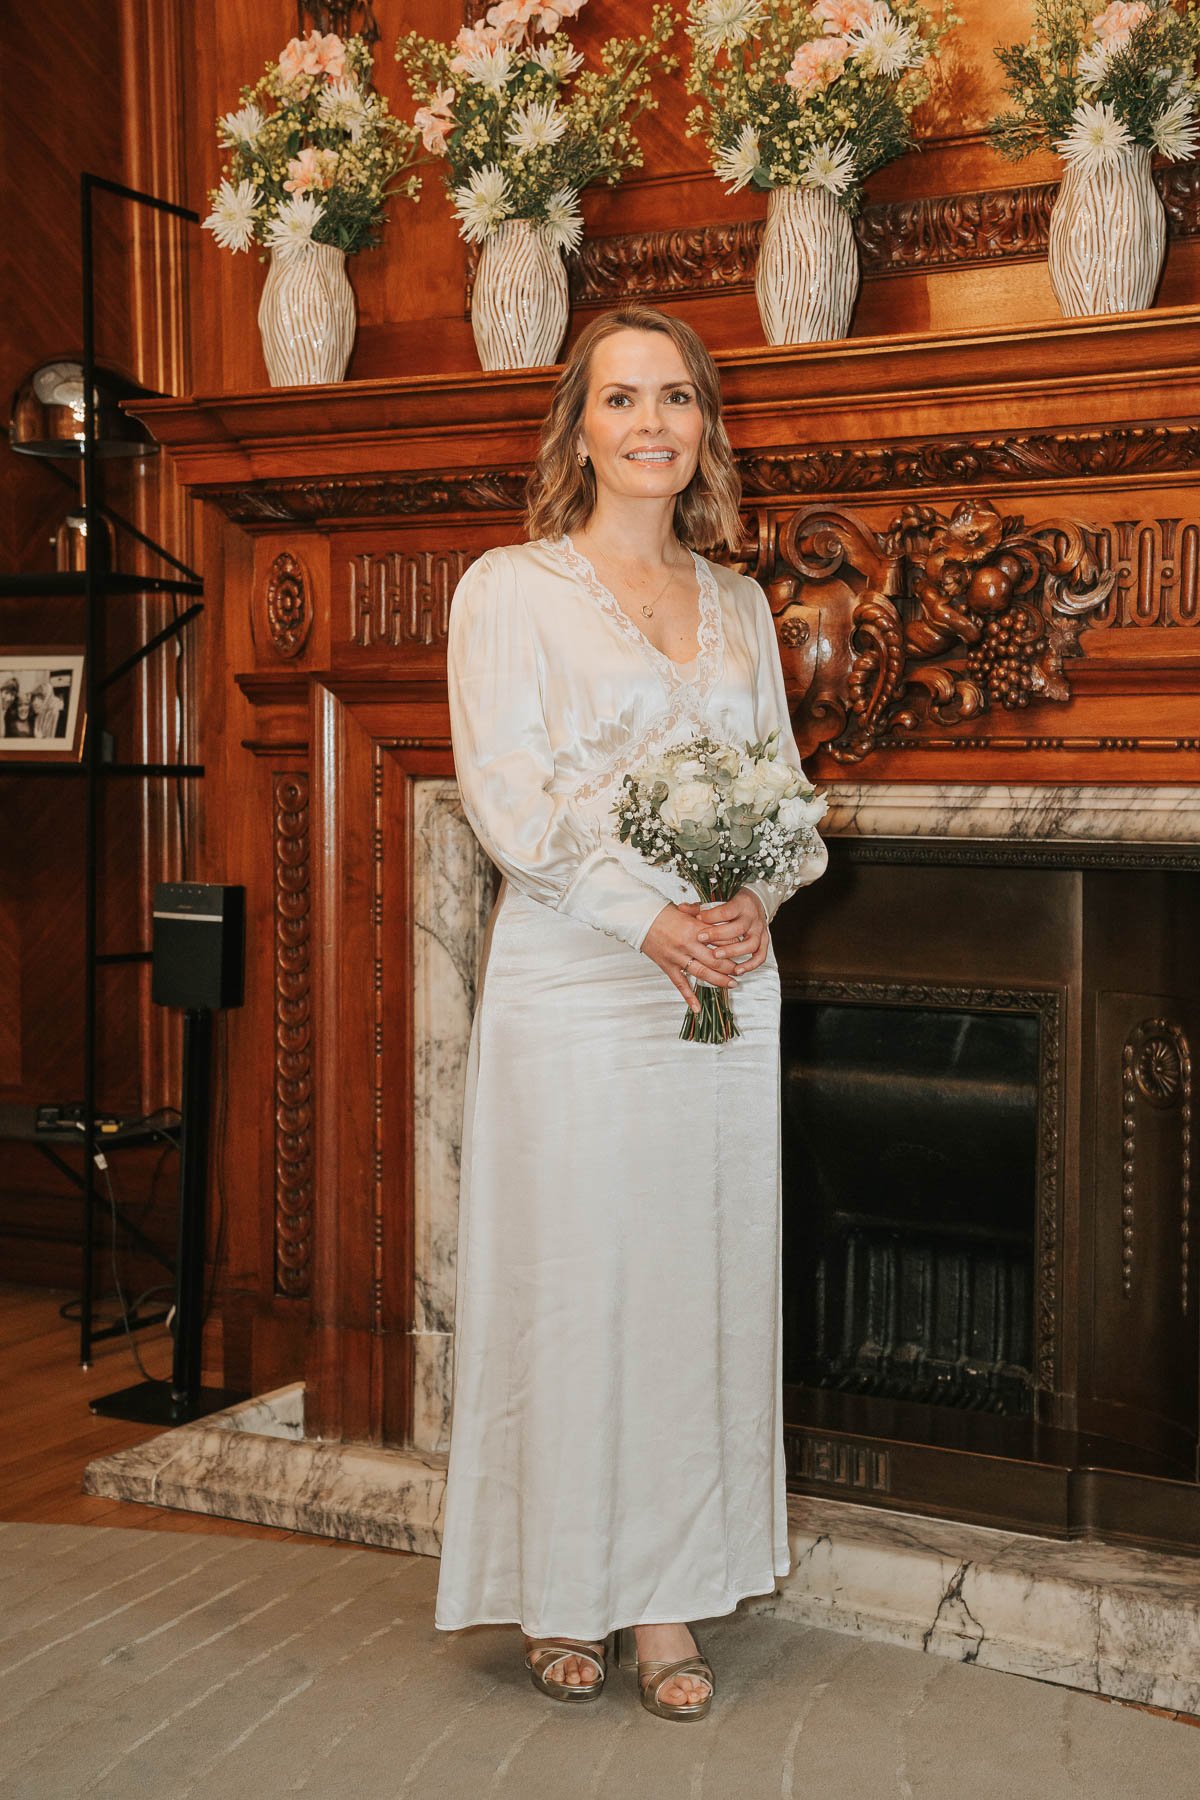  Bride standing in front of fireplace holding wedding flowers, in the Paddington Room at Old Marylebone Town Hall. 